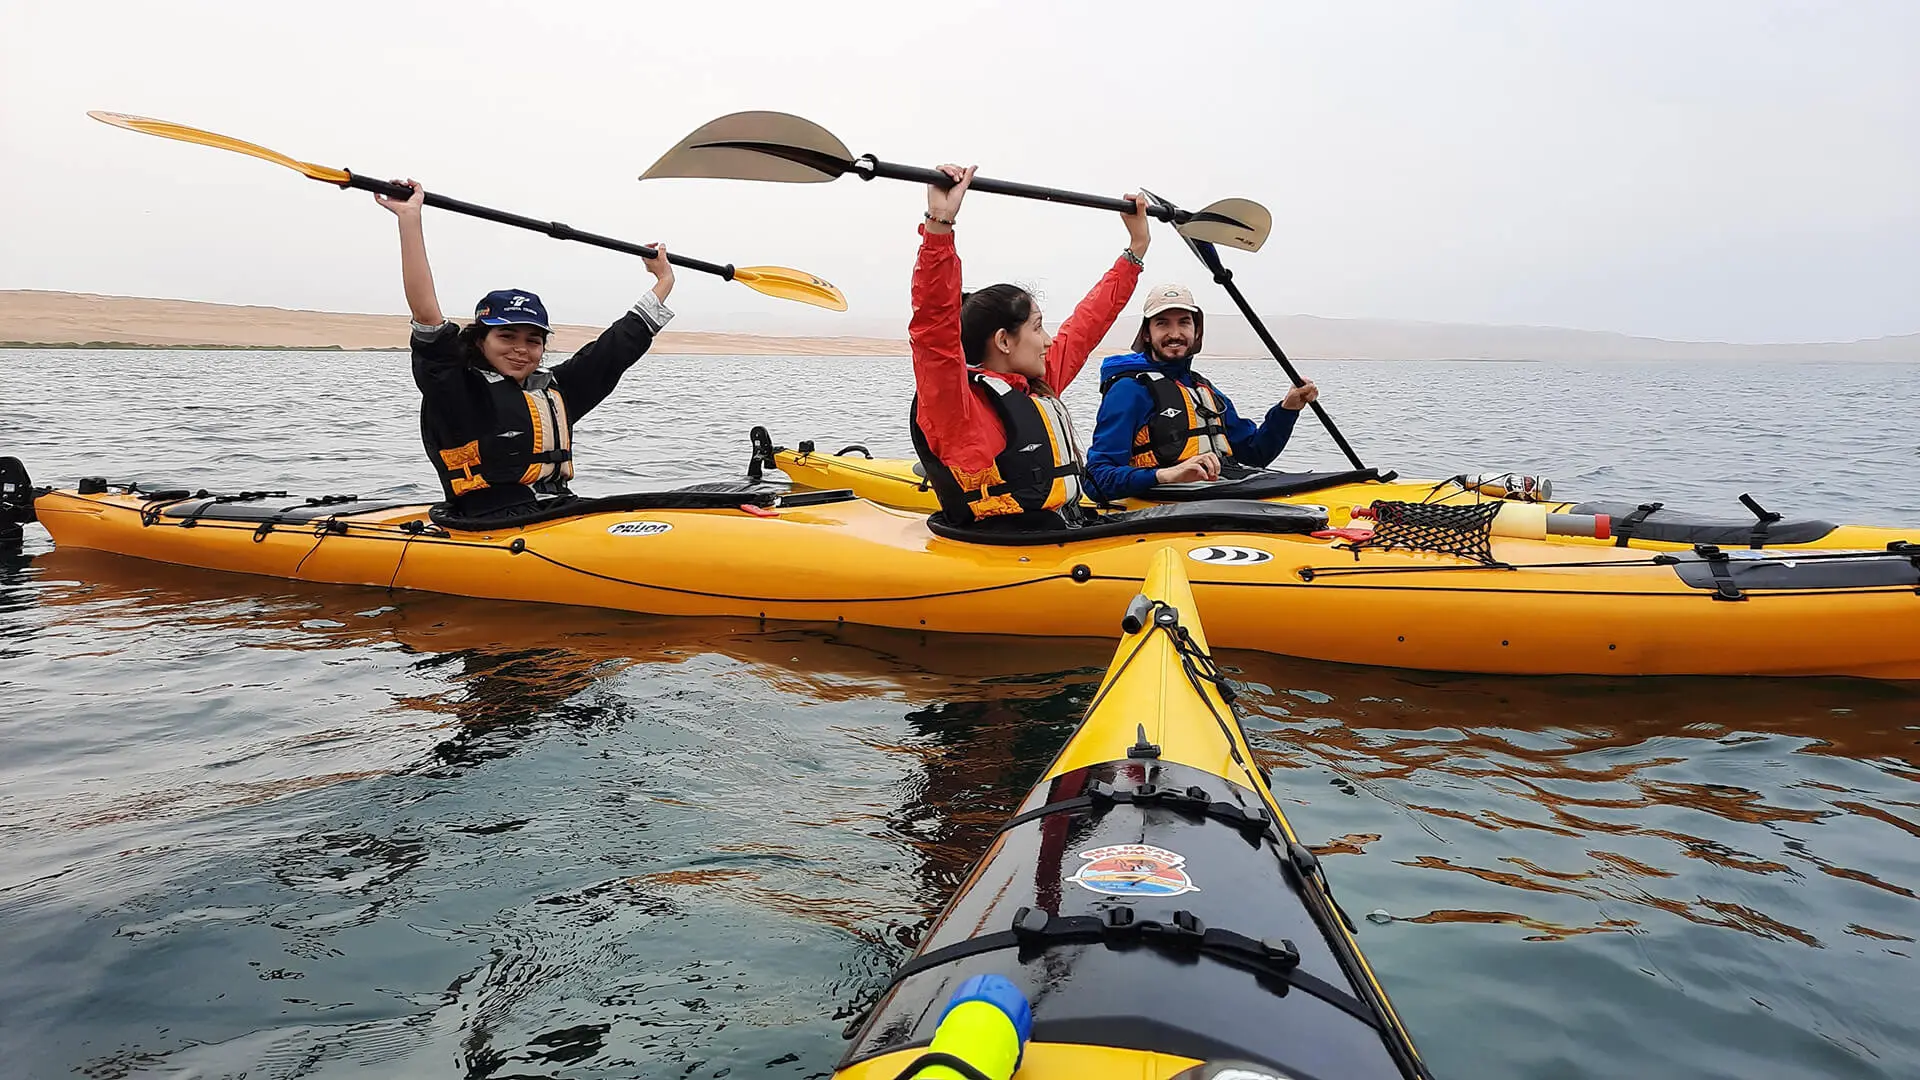 P.O.V. of kayaker of two other kayaks with young passengers saluting with paddles - RESPONSible Travel Peru